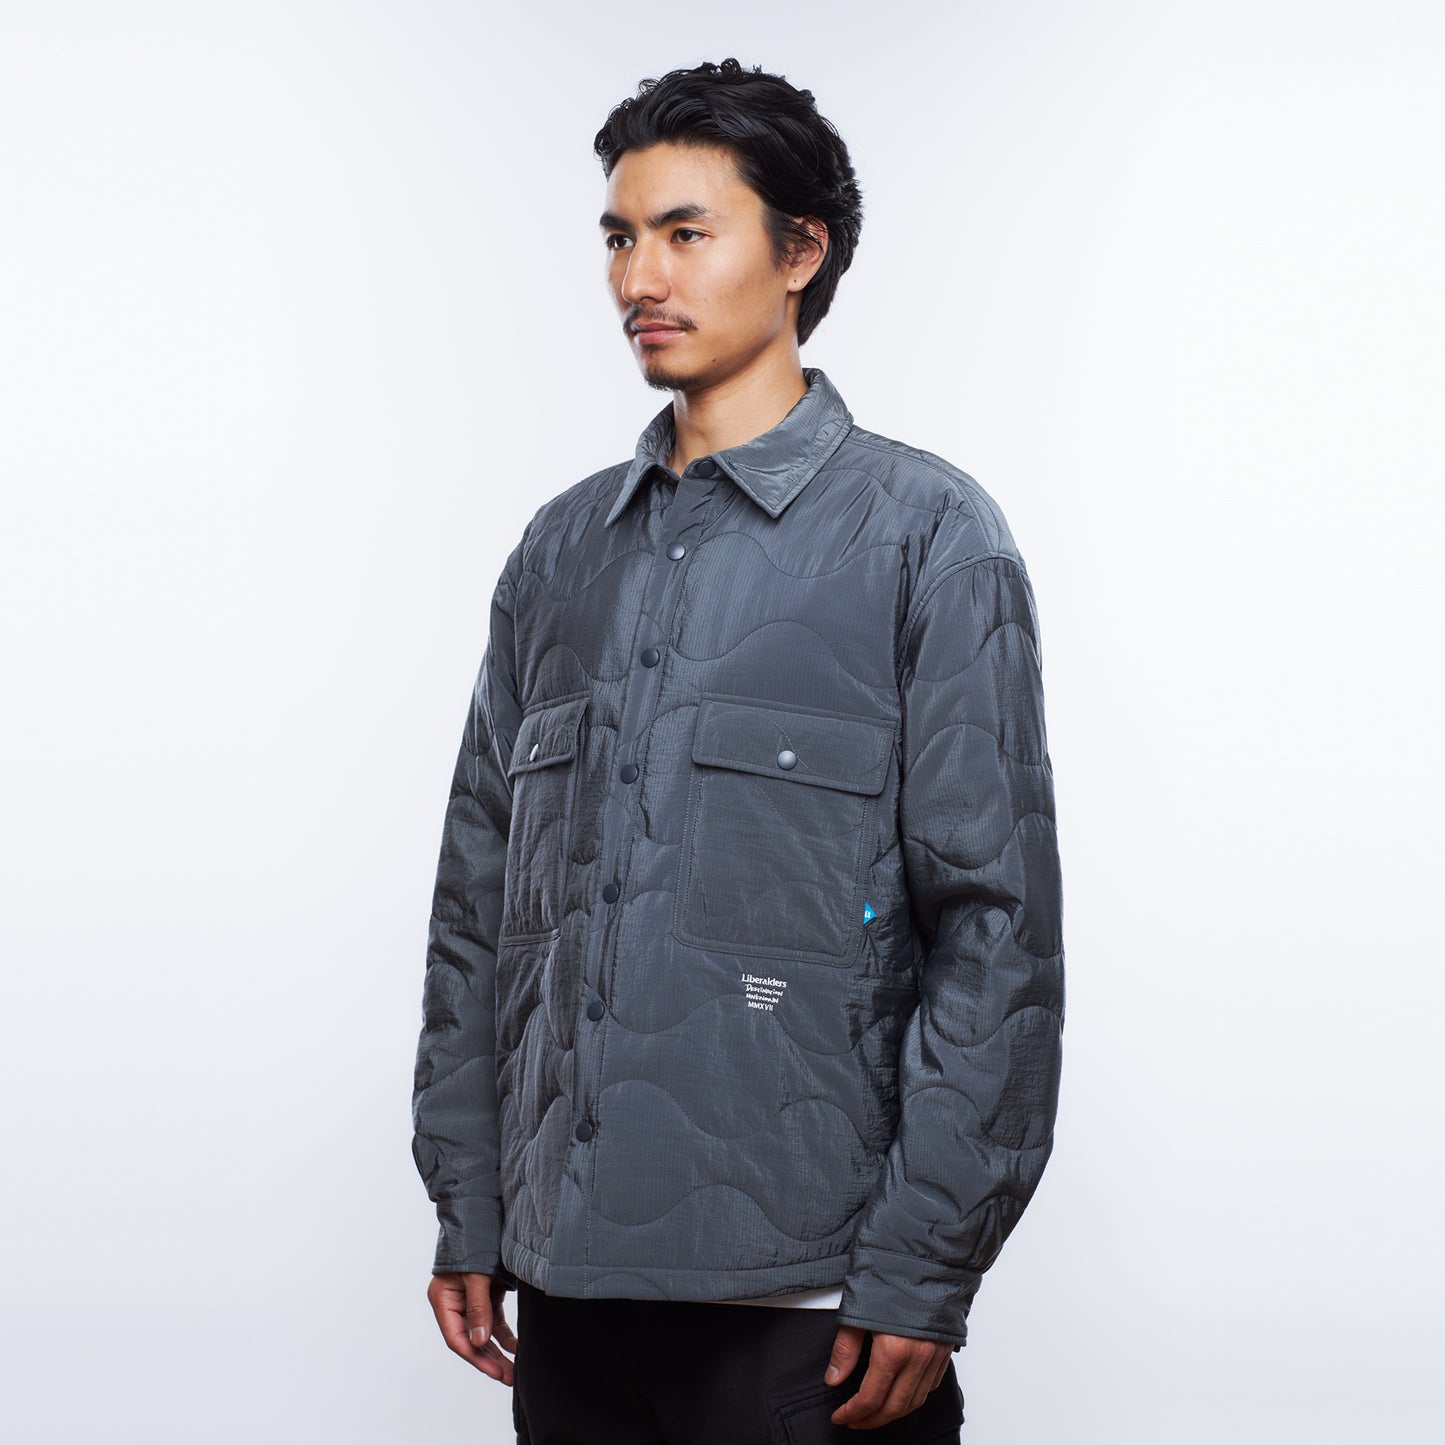 Liberaiders 23 / ALL CONDITIONS 3LAYER JACKET 75102